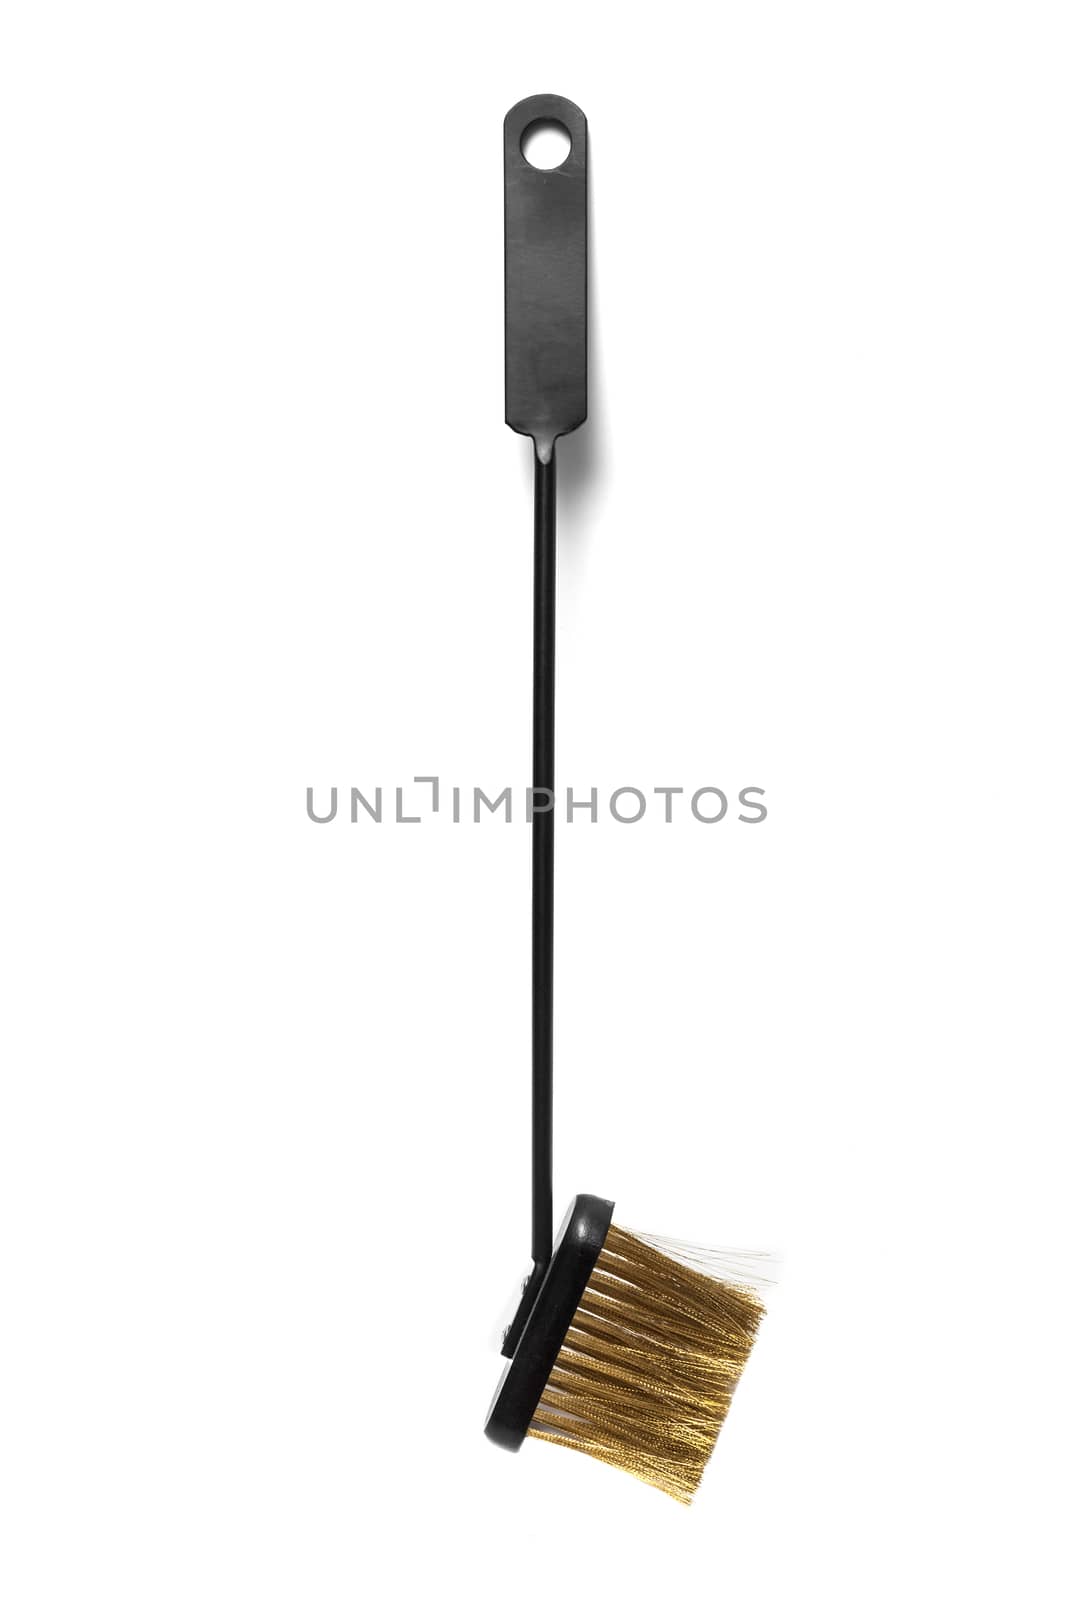 Set of fireplace accessories. Isolated on white background